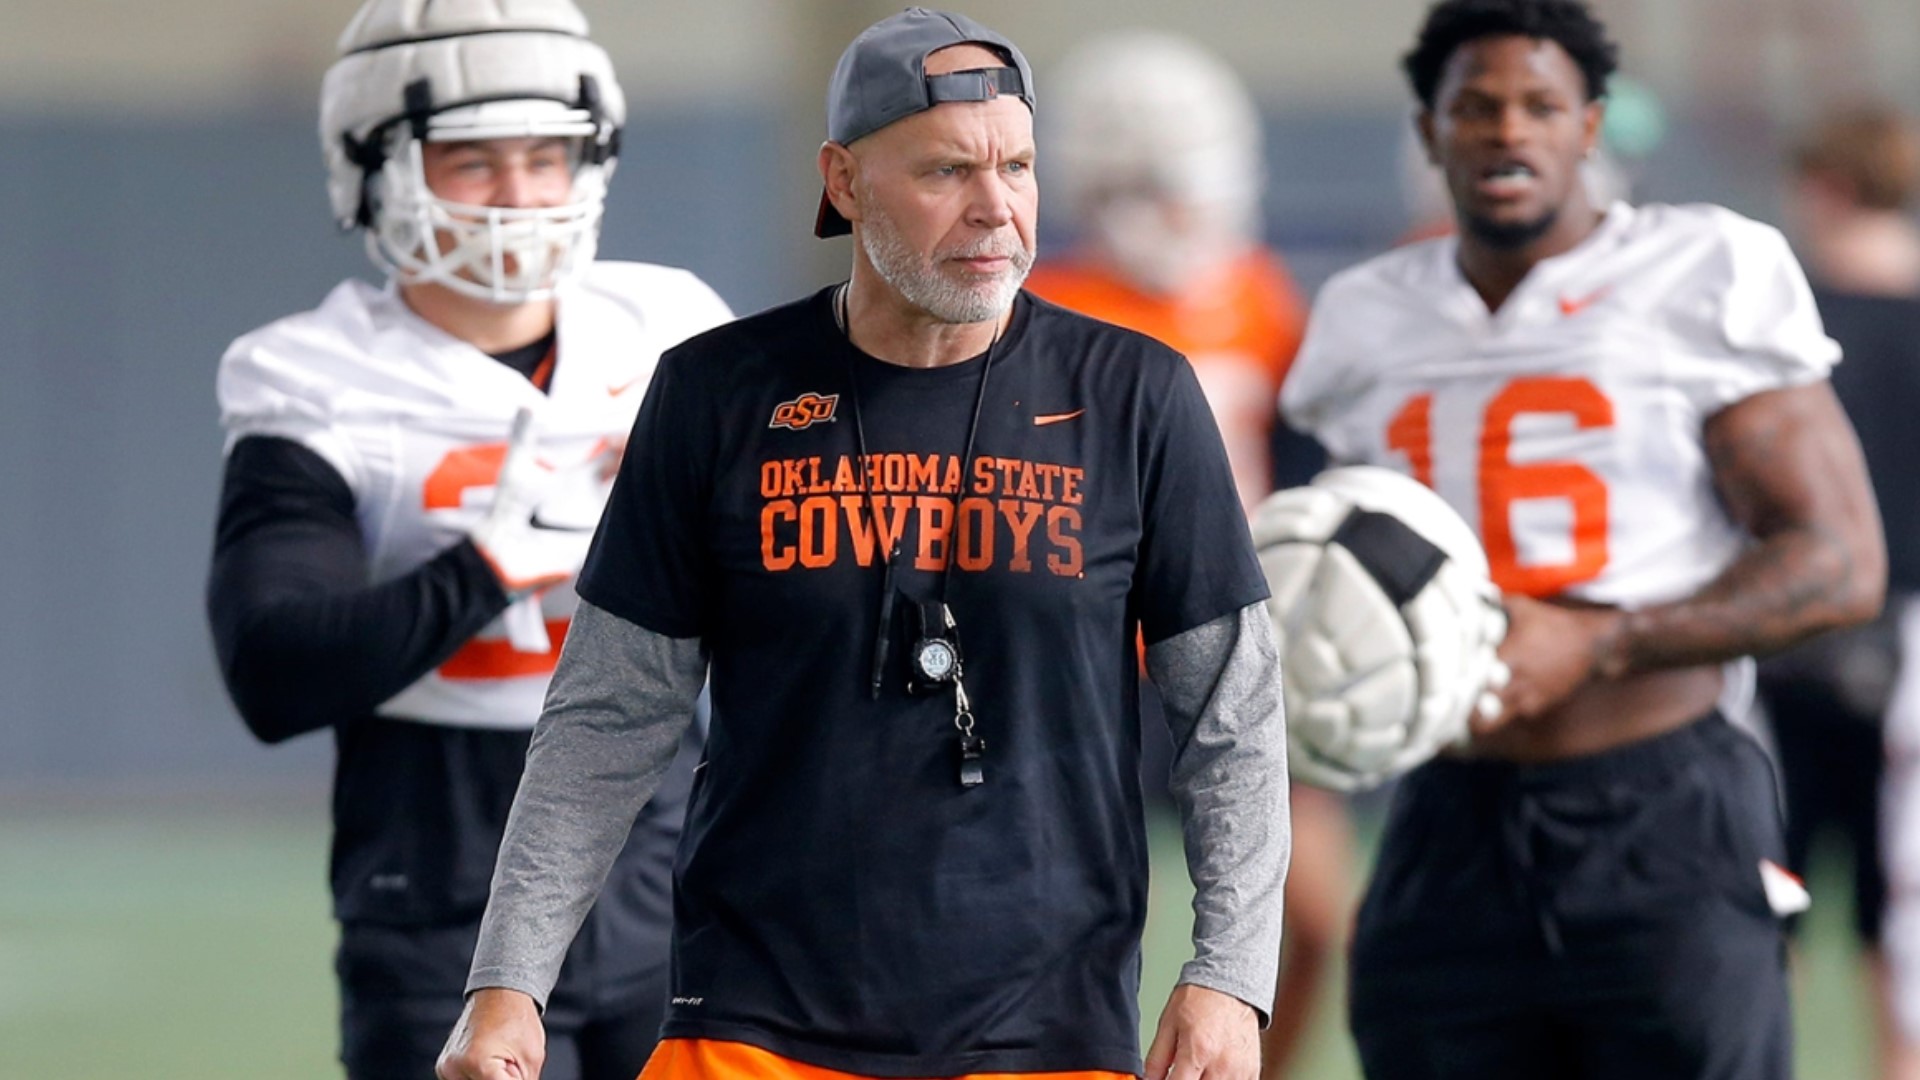 Ryan Day announced Tuesday that Oklahoma State's current defensive coordinator Jim Knowles has accepted an offer to lead the Buckeye defense.